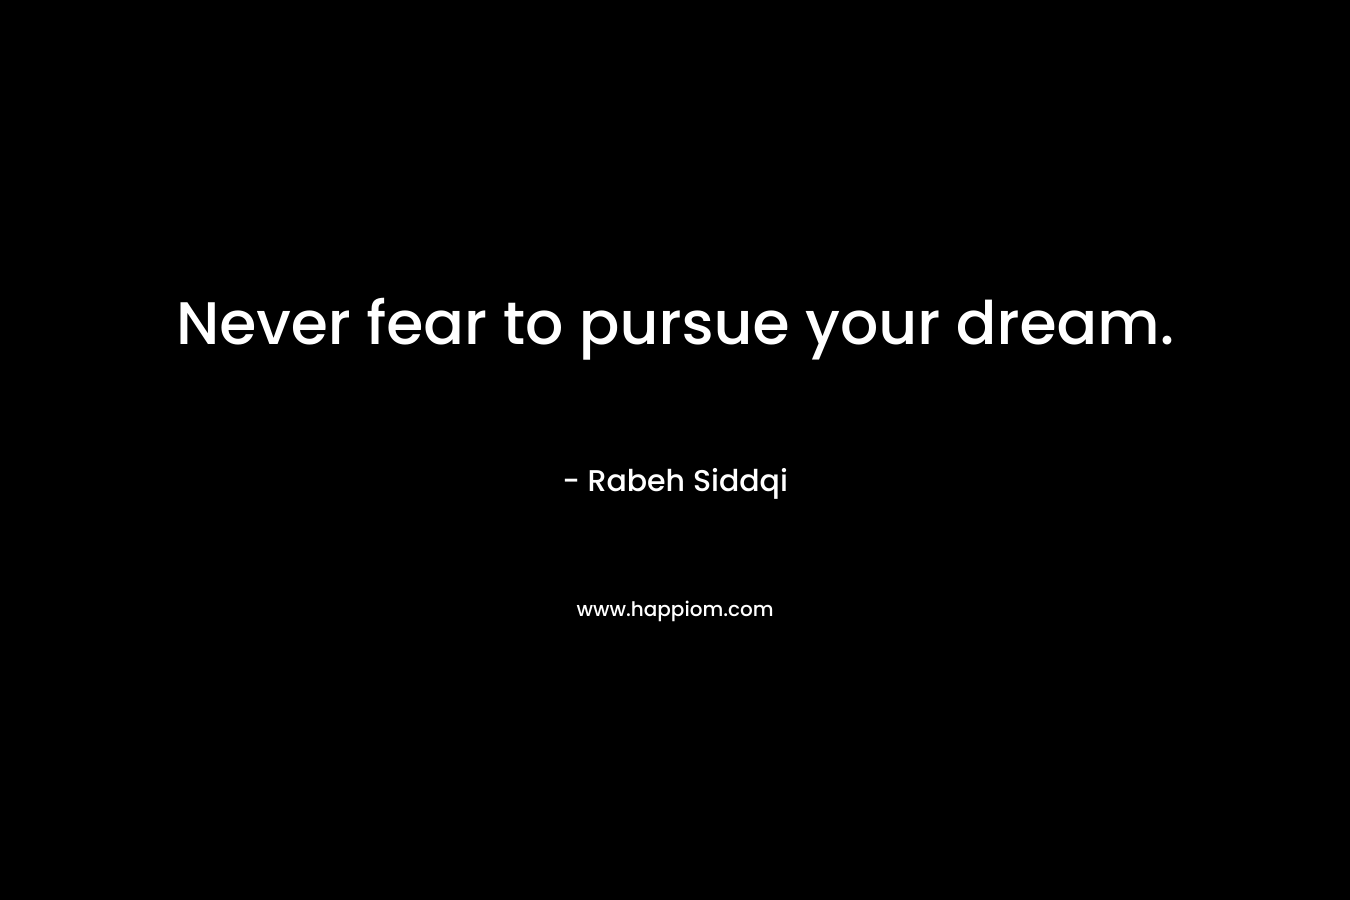 Never fear to pursue your dream.